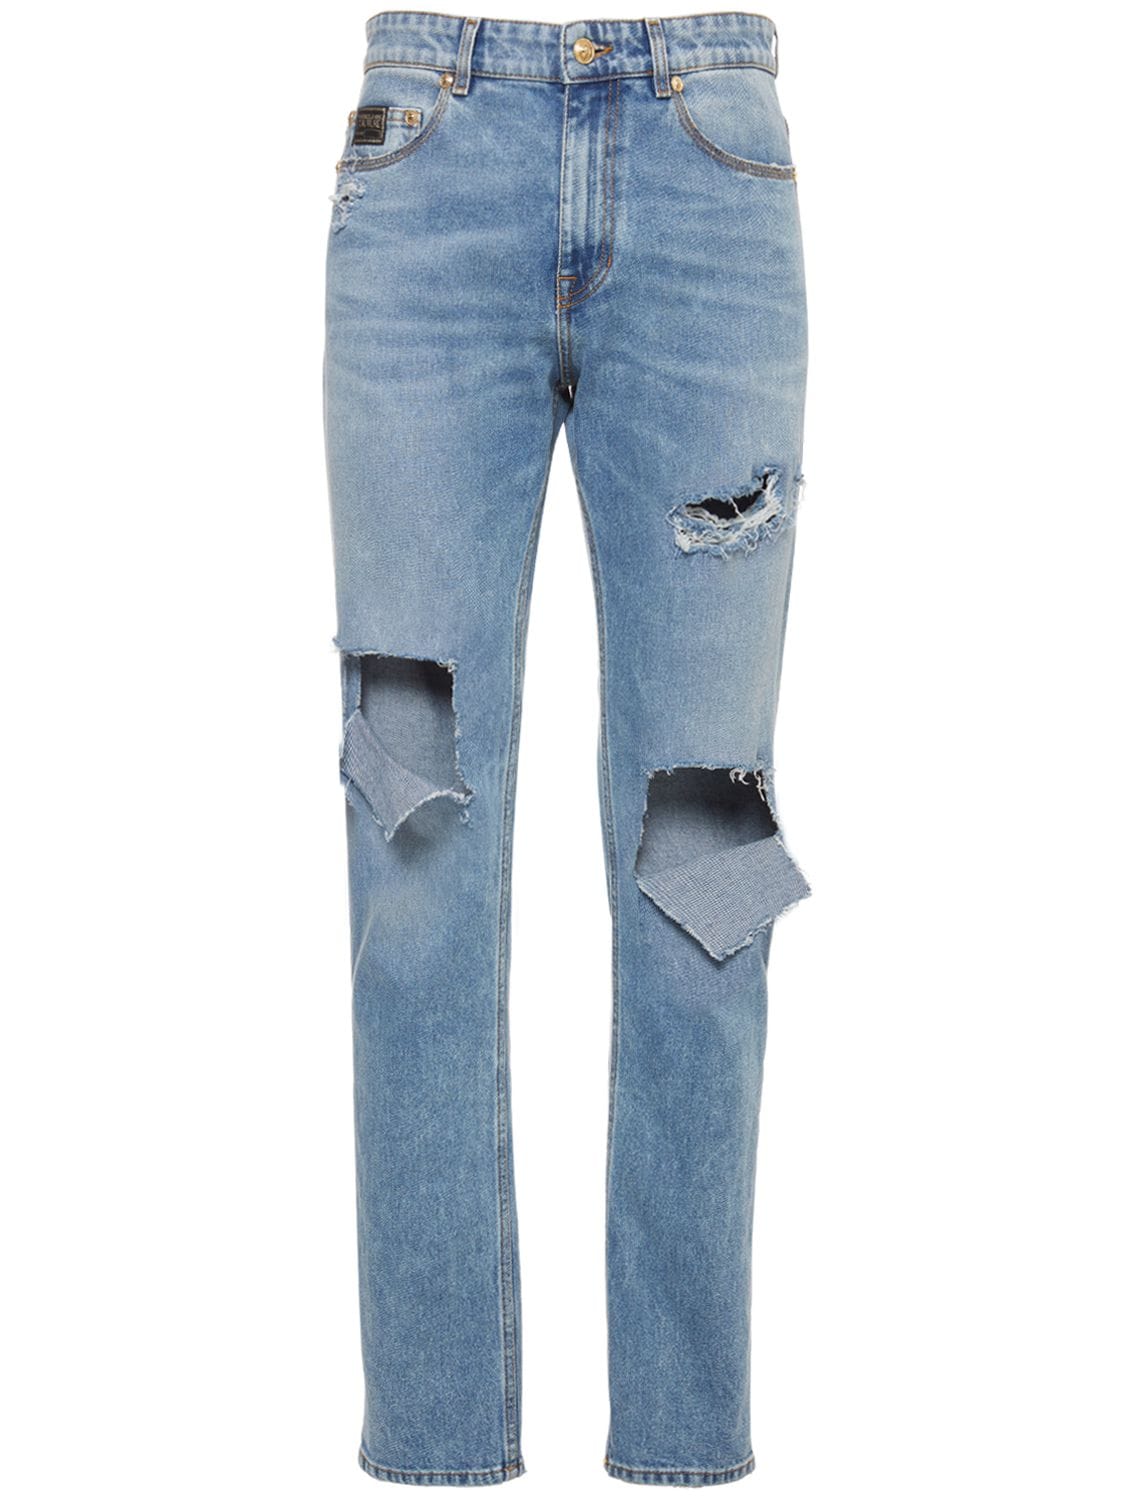 VERSACE JEANS COUTURE DESTROYED COTTON DENIM SLIM JEANS,74IBQN024-OTA00